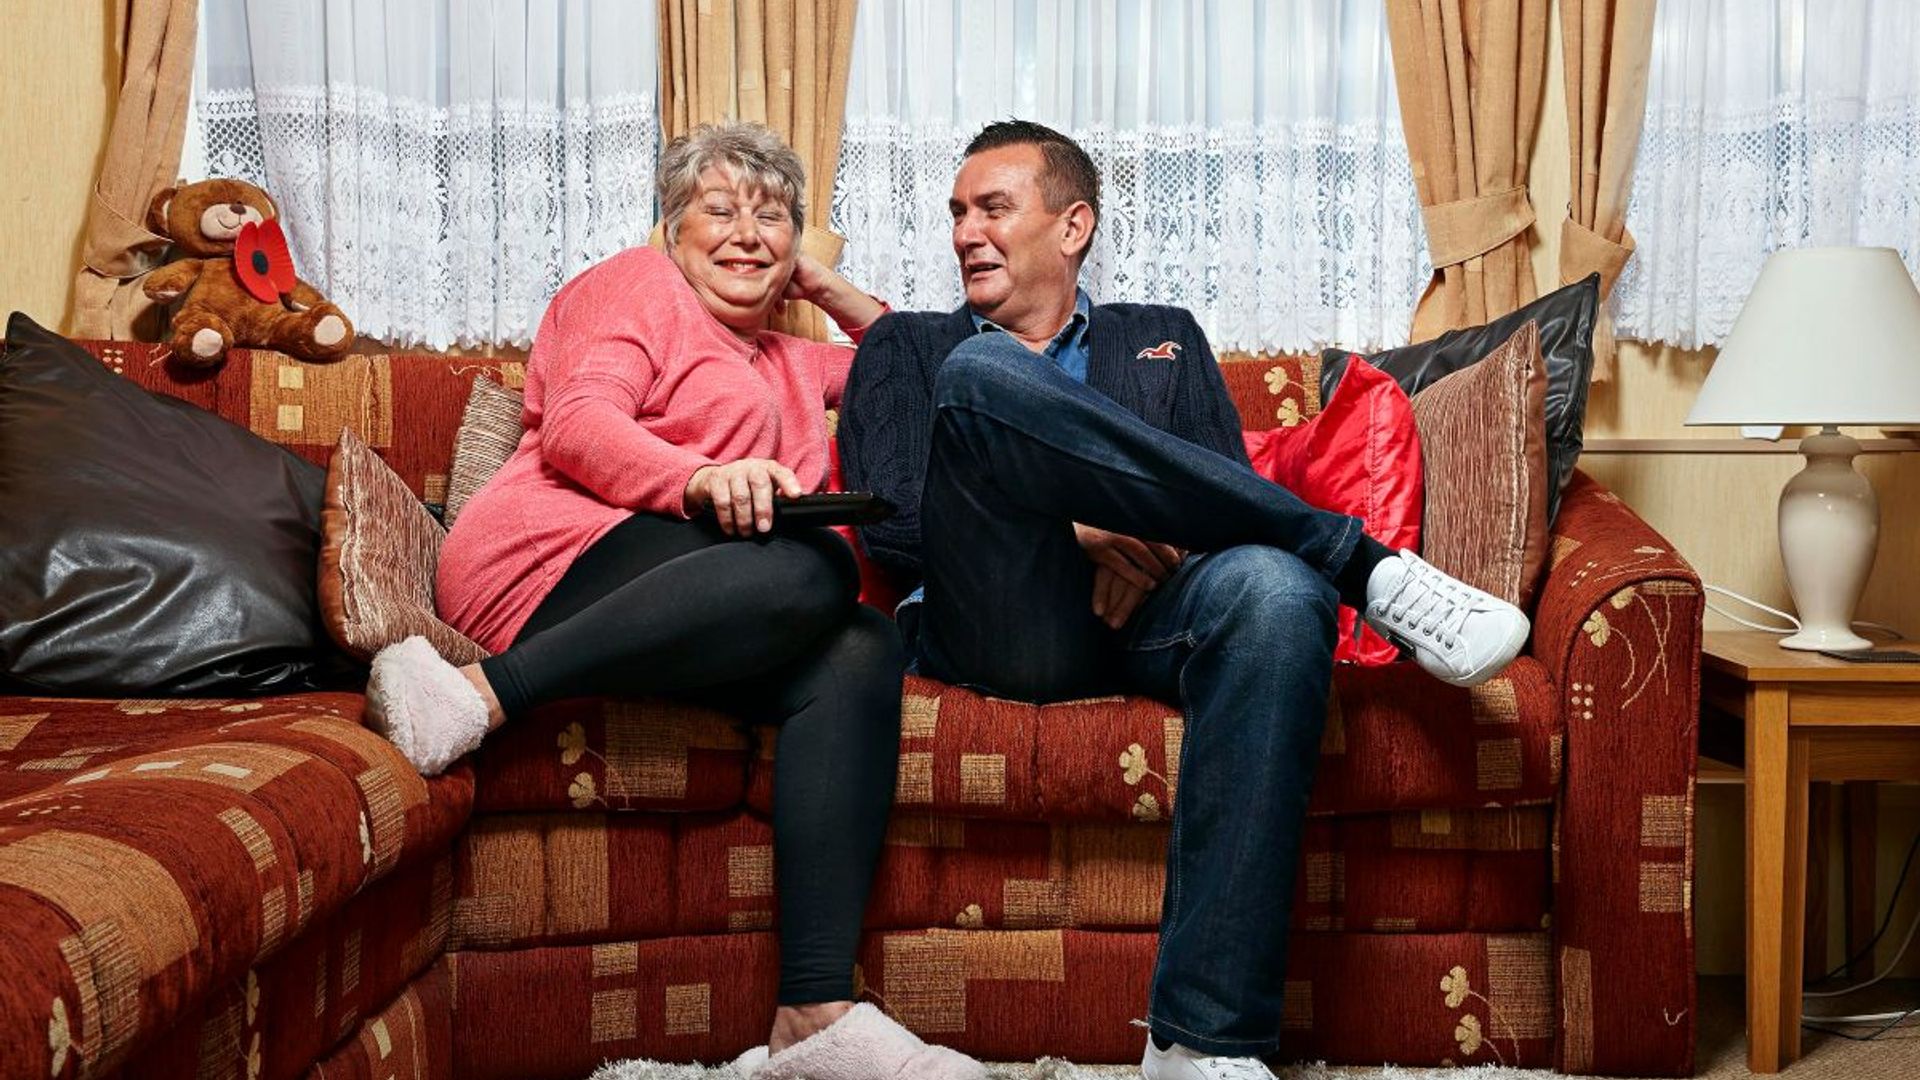 Gogglebox spin-off coming to E4 - get the details 